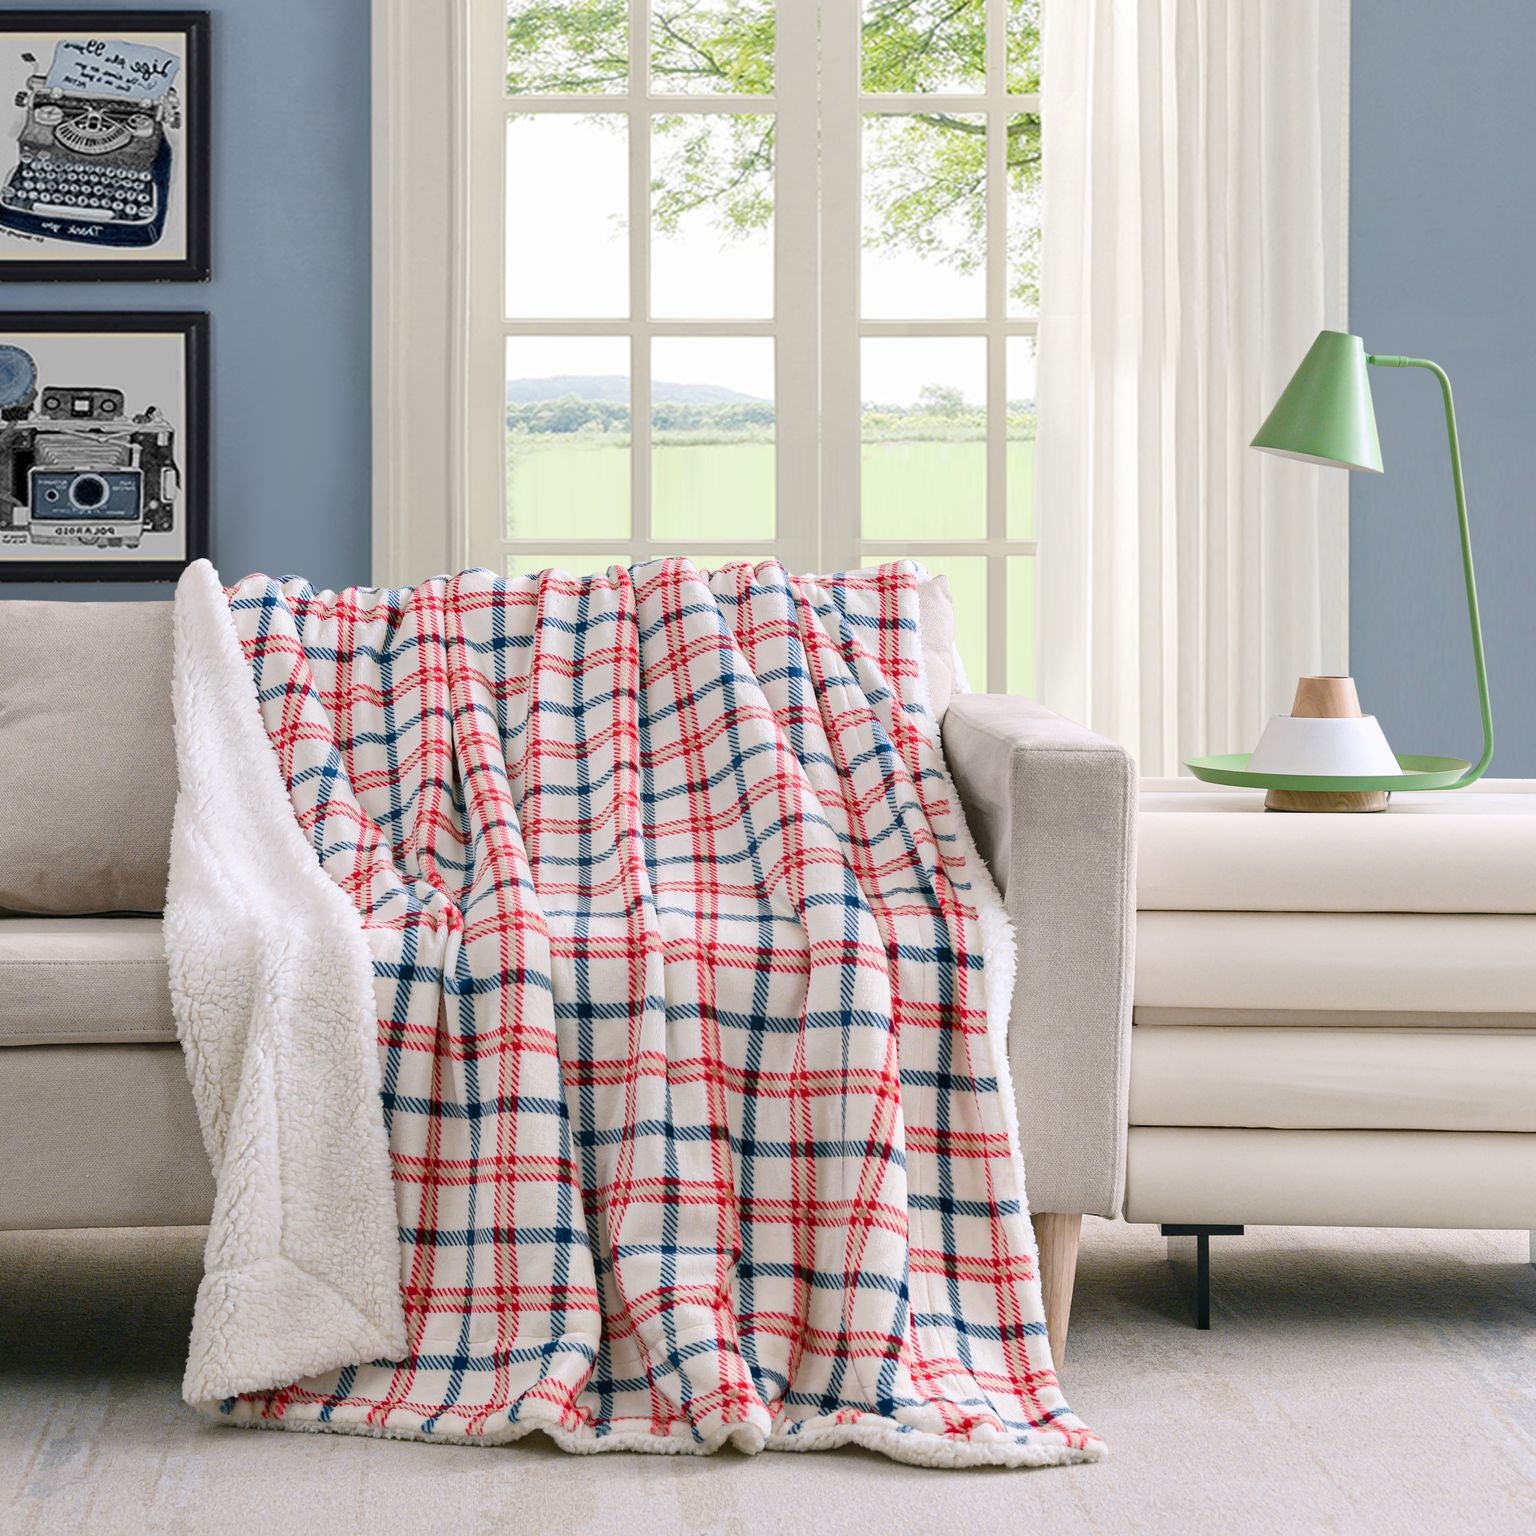 Printed Velvet to Solid Sherpa Throw Blanket 50 x 60 inches Caulli Plaid